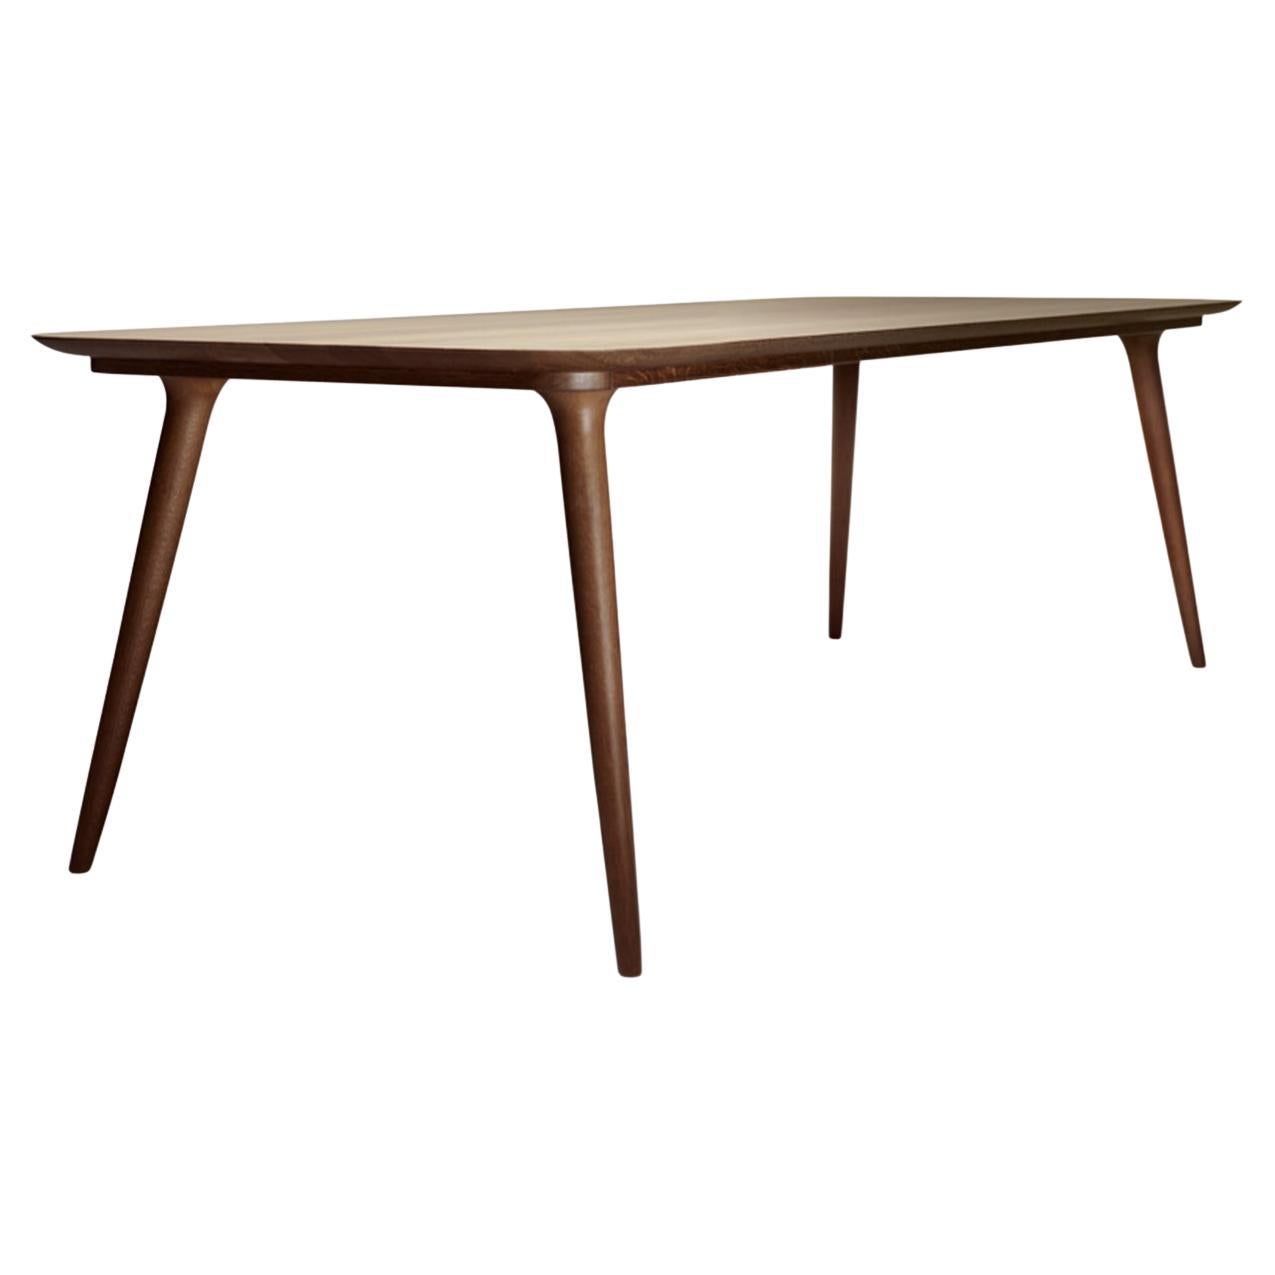 Moooi Zio Small Dining Table in Cinnamon Stained Oak by Marcel Wanders Studio For Sale